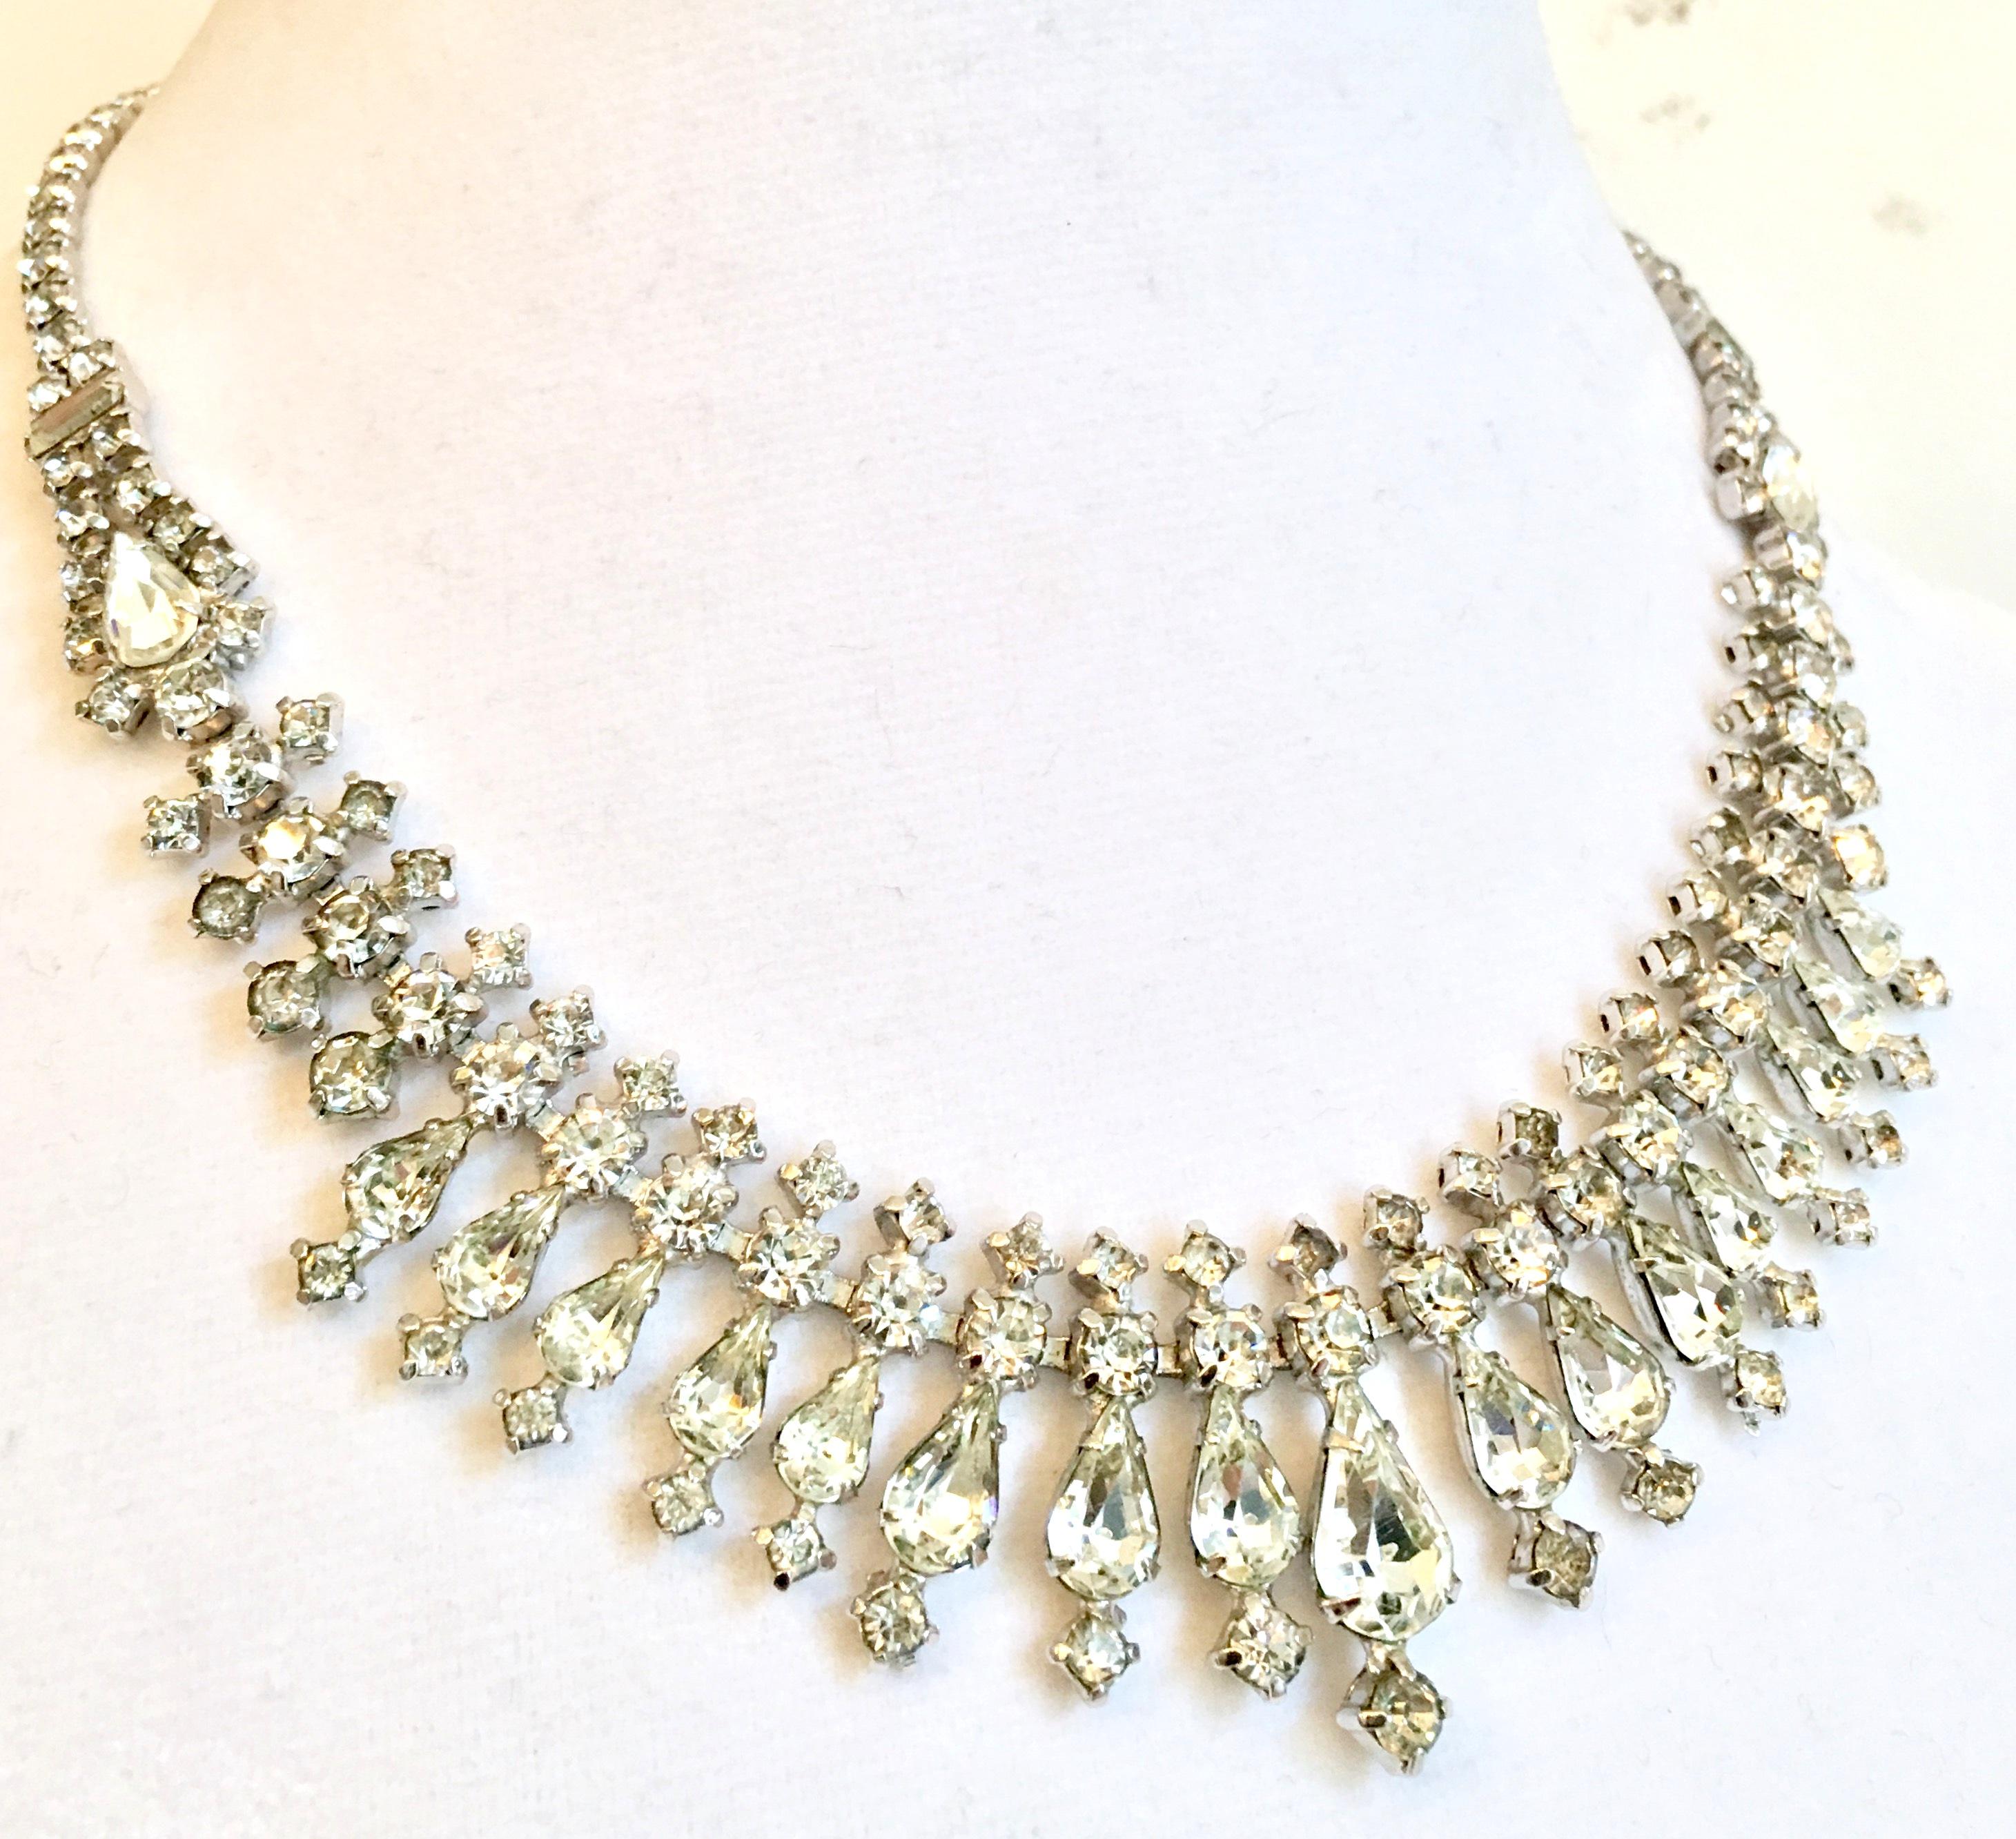 20th Century Silver & Austrian Crystal Clear Rhinestone Choker Style Necklace By, Ledo. This silver rhodium plate, prong set Austrian crystal cut and faceted rhinestone necklace features, brilliant Austrian crystal clear rhinestones in round, pearl